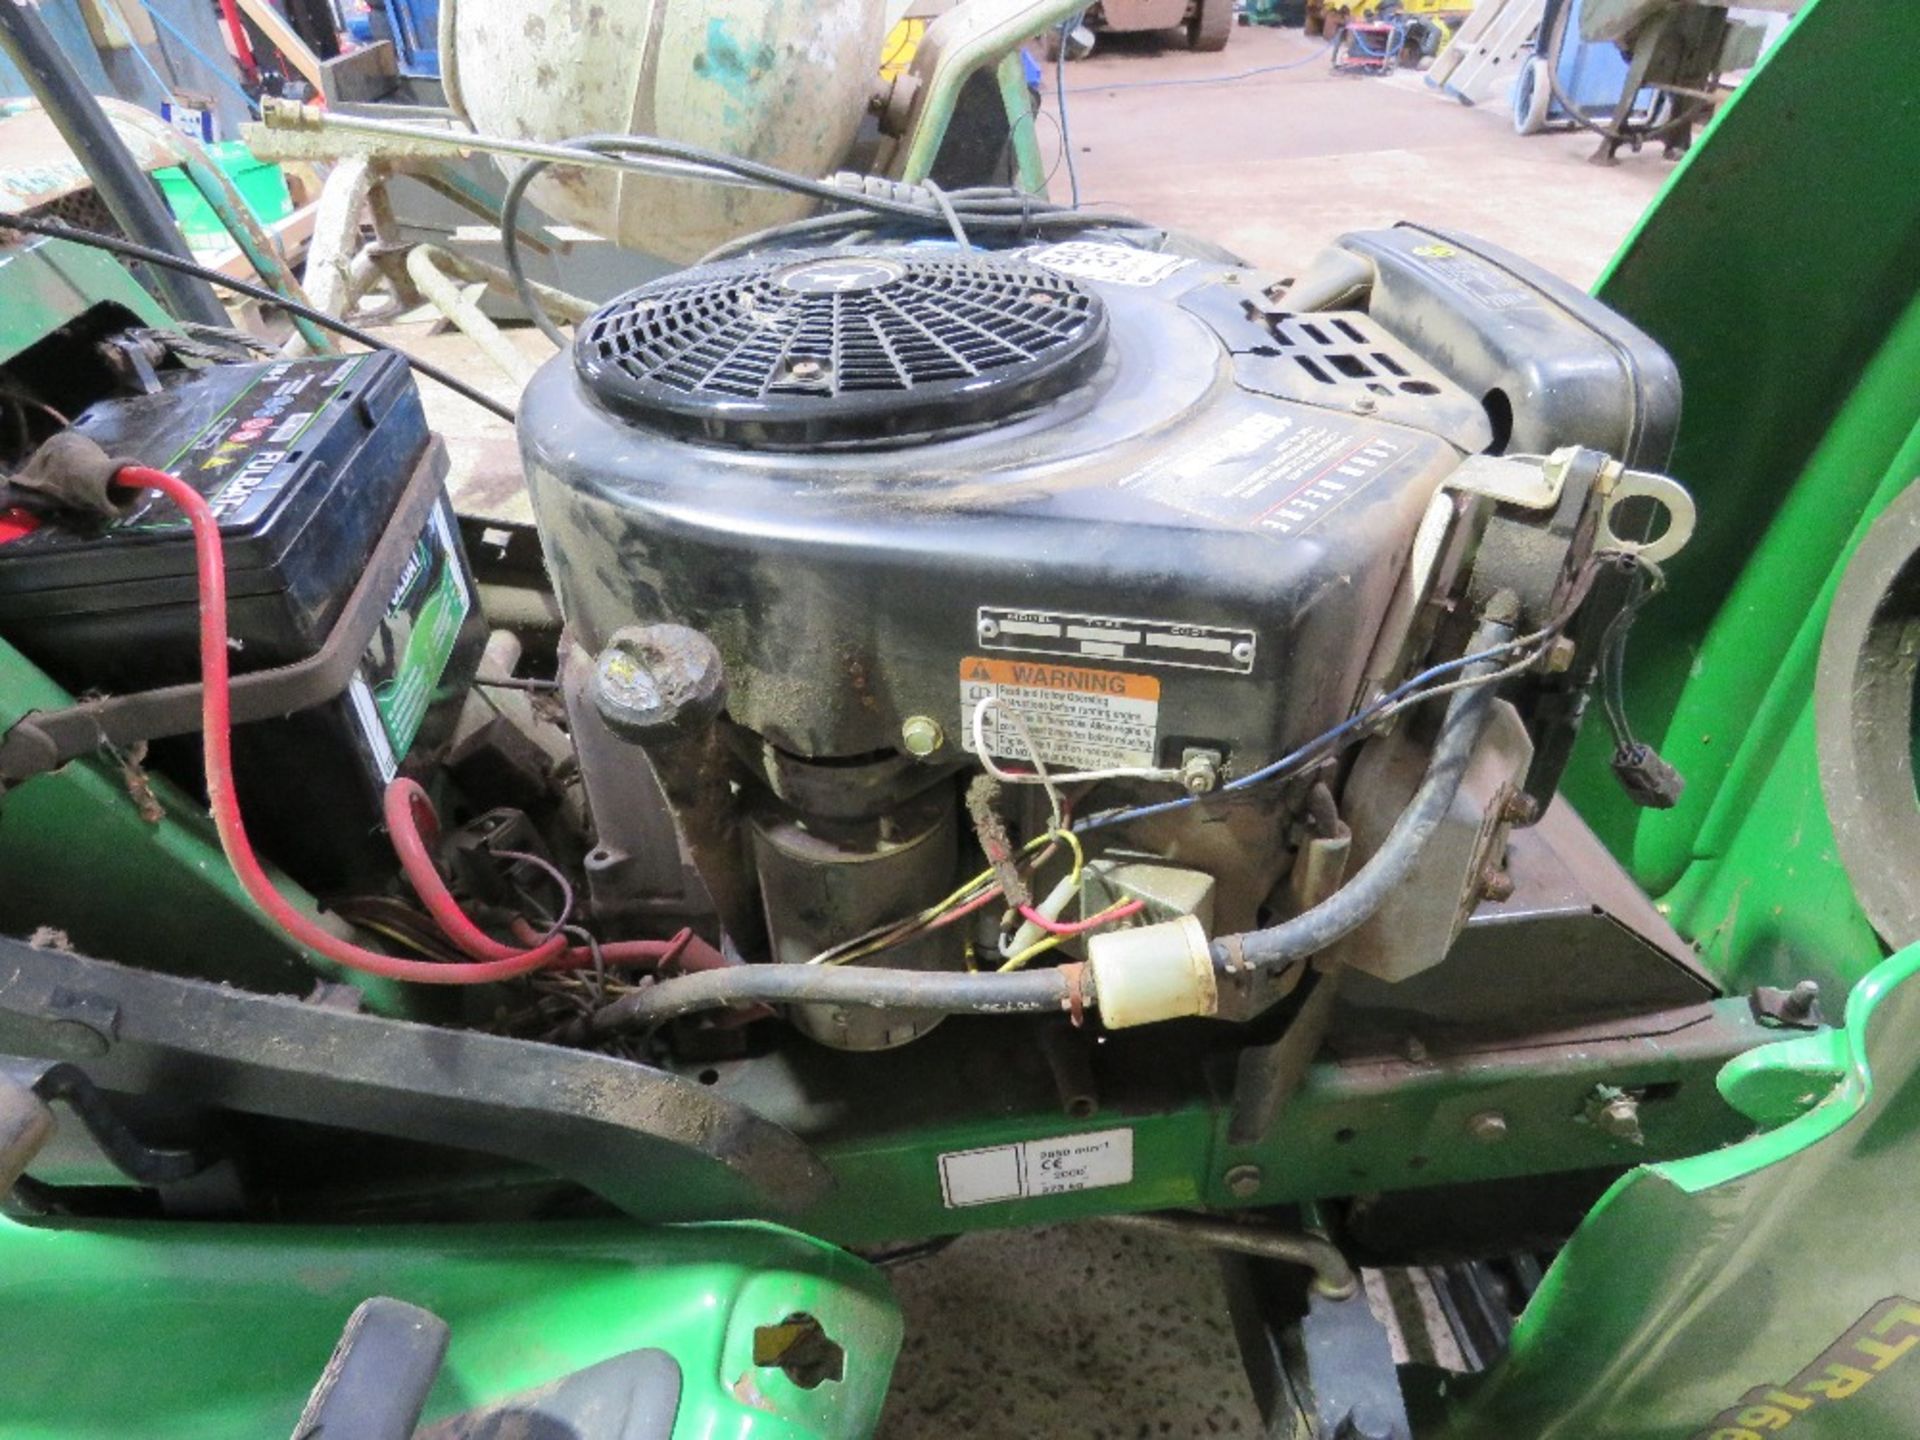 JOHN DEERE LTR166 RIDE ON MOWER. WHEN TESTED WAS SEEN TO RUN AND DRIVE BUT MOWER NOT ENGAGING (NO BE - Image 7 of 8